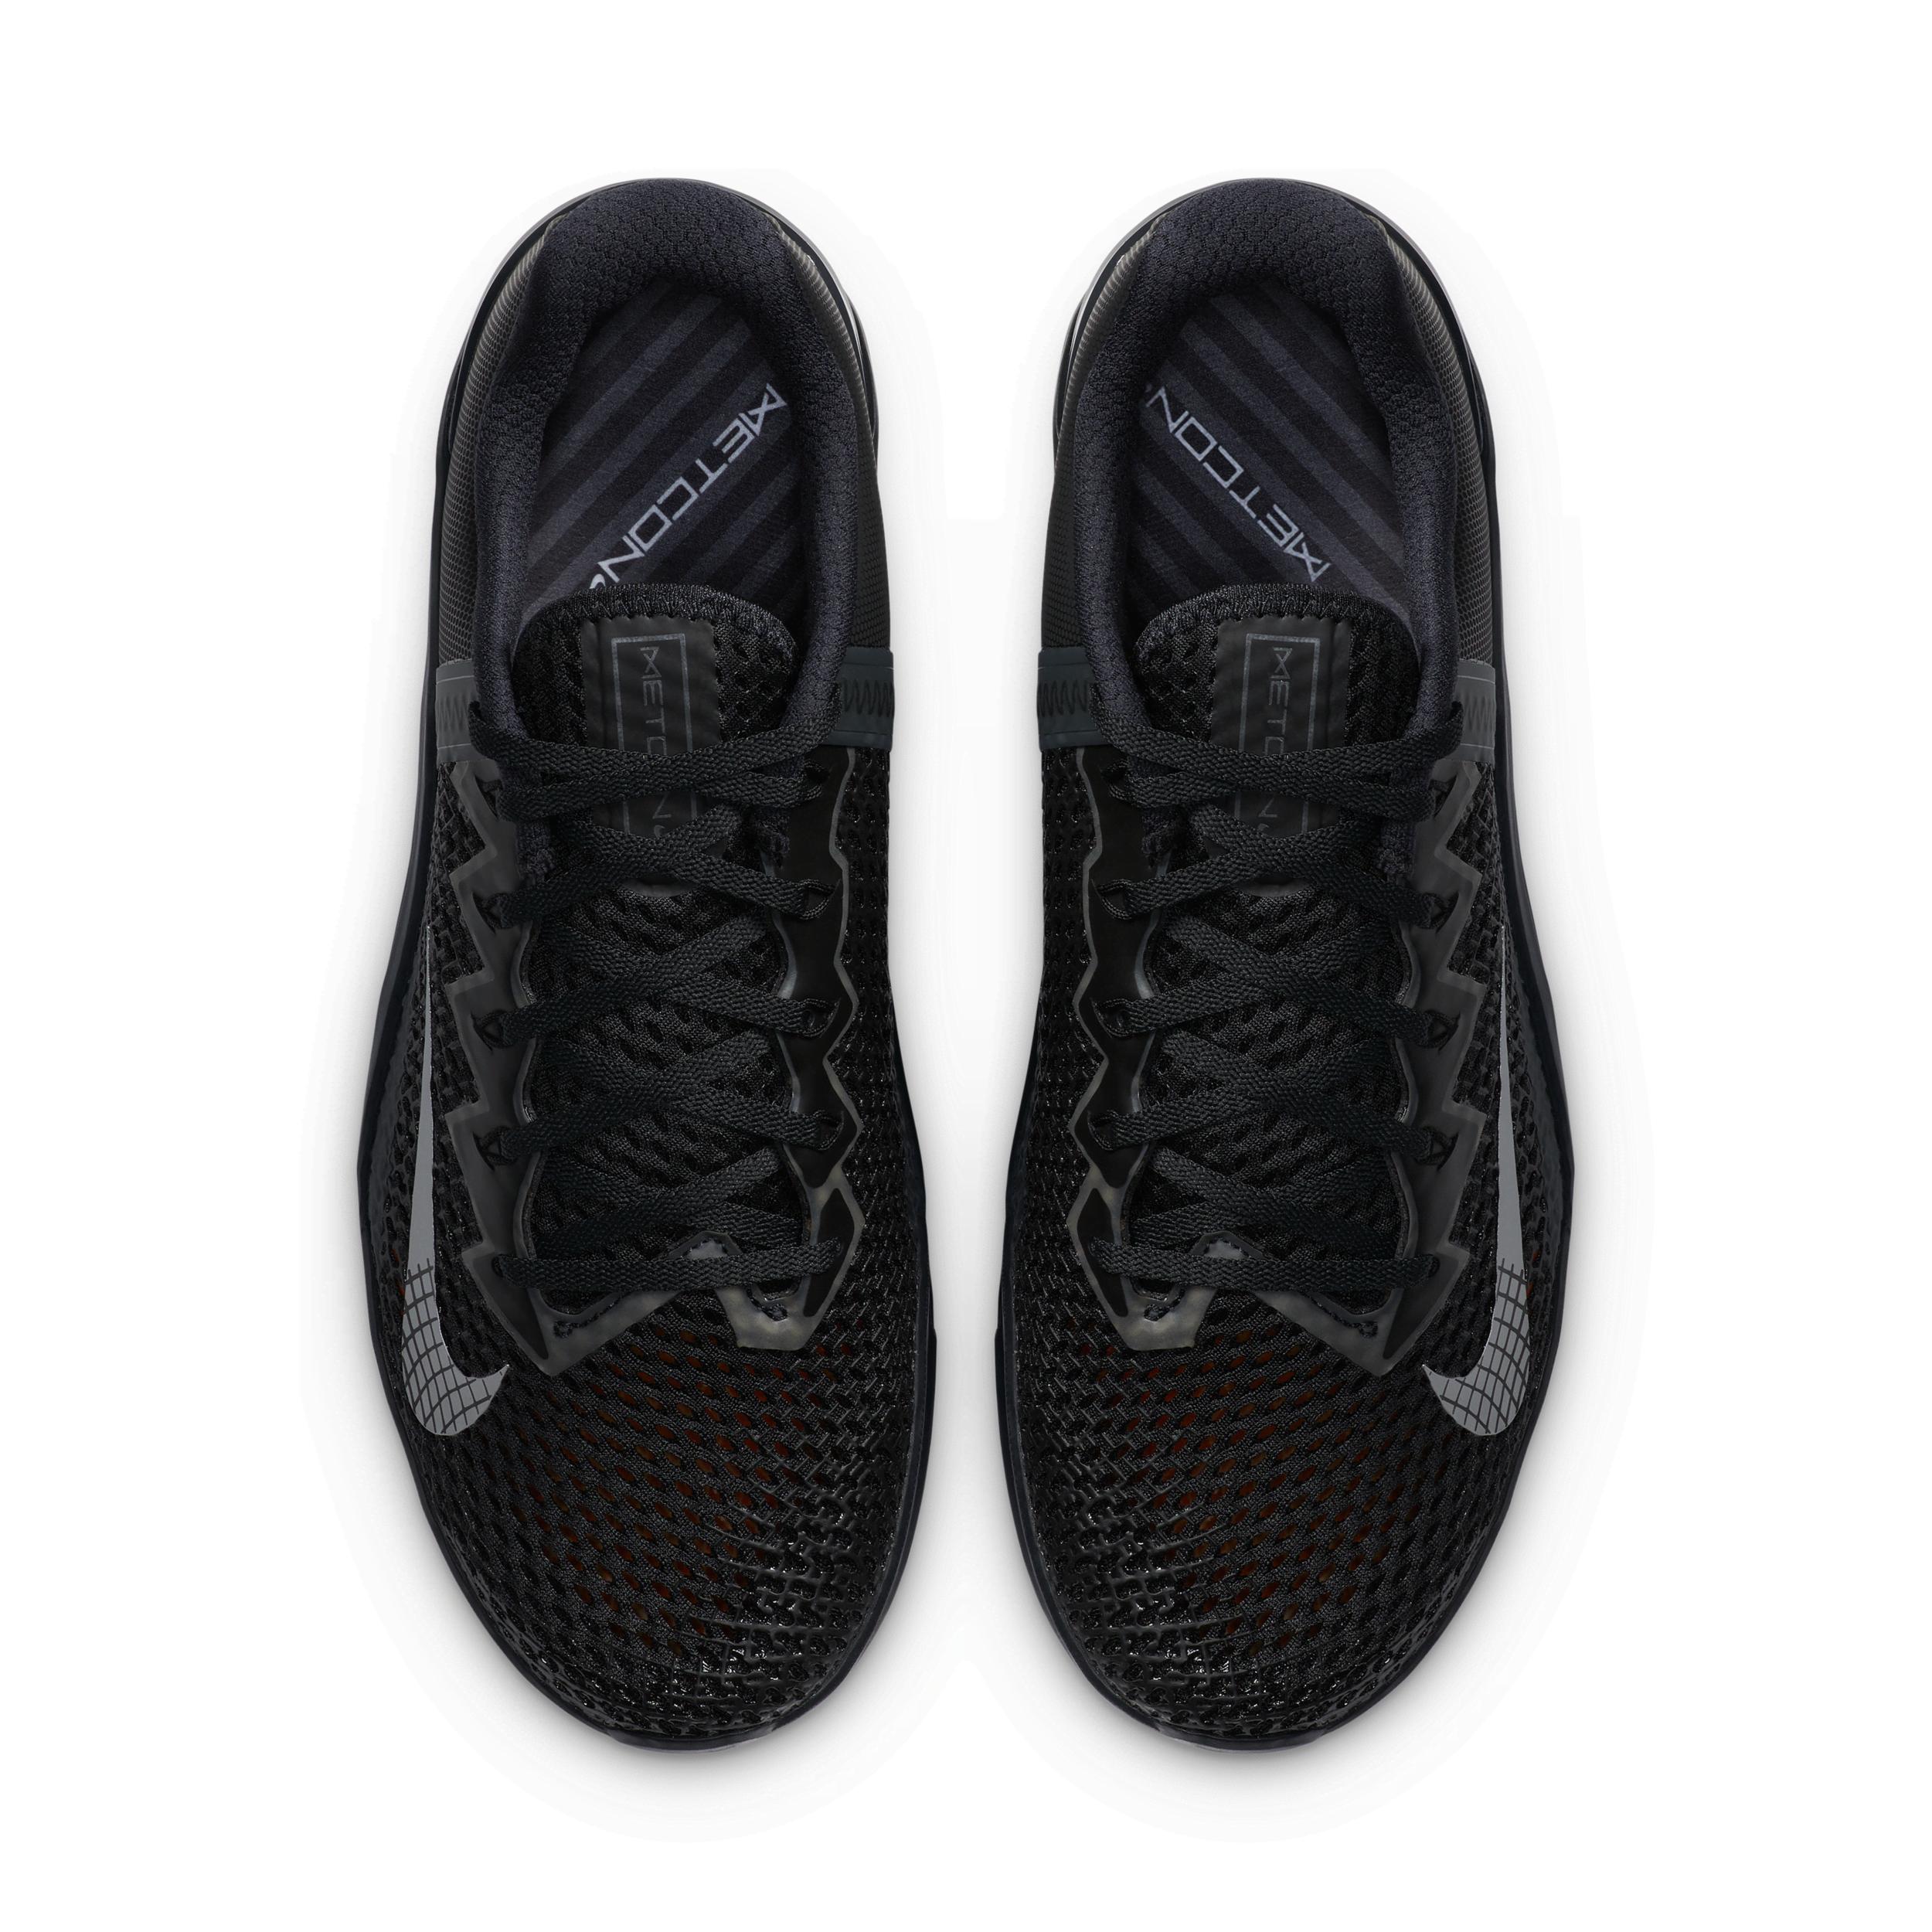 Nike Metcon 6 Training Shoes in Black | Lyst